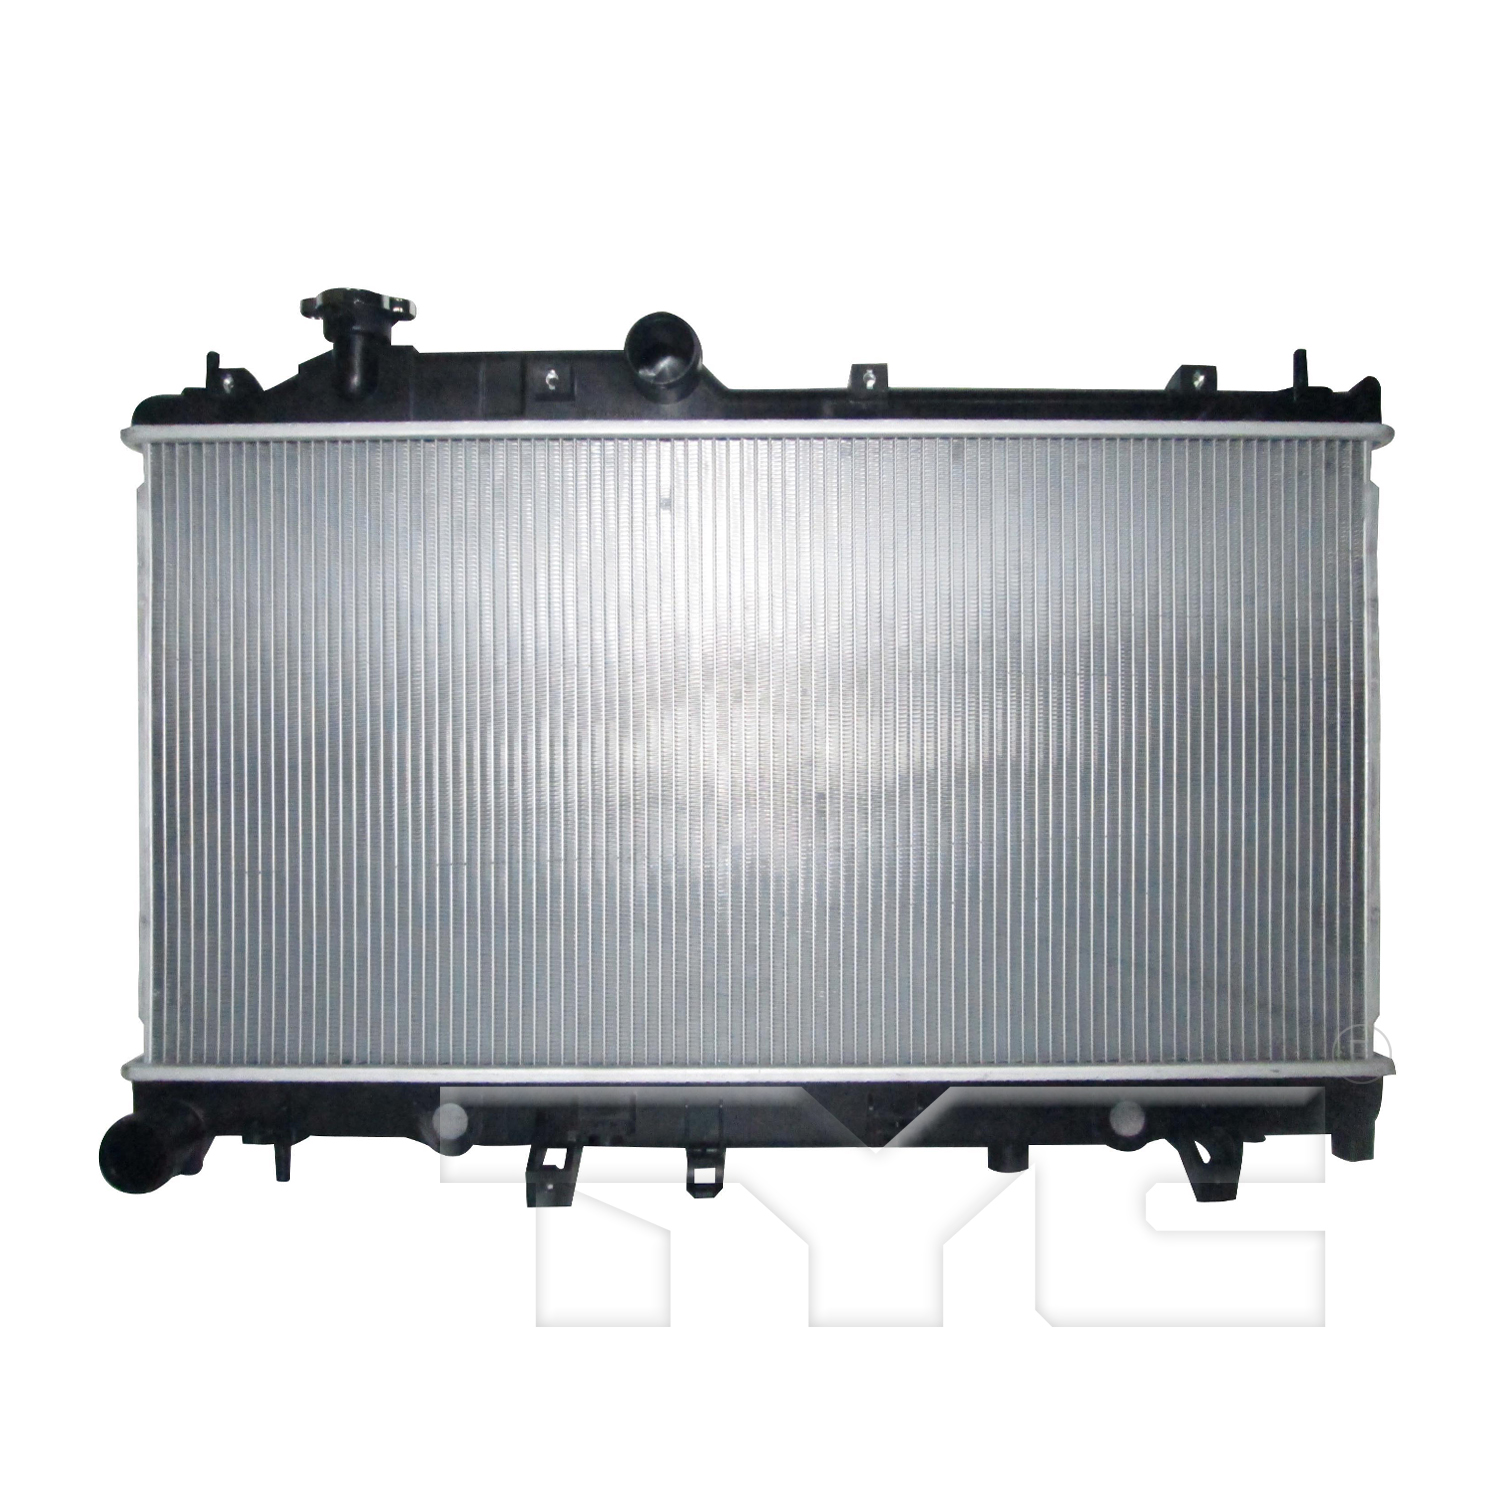 Aftermarket RADIATORS for SUBARU - OUTBACK, OUTBACK,11-14,Radiator assembly